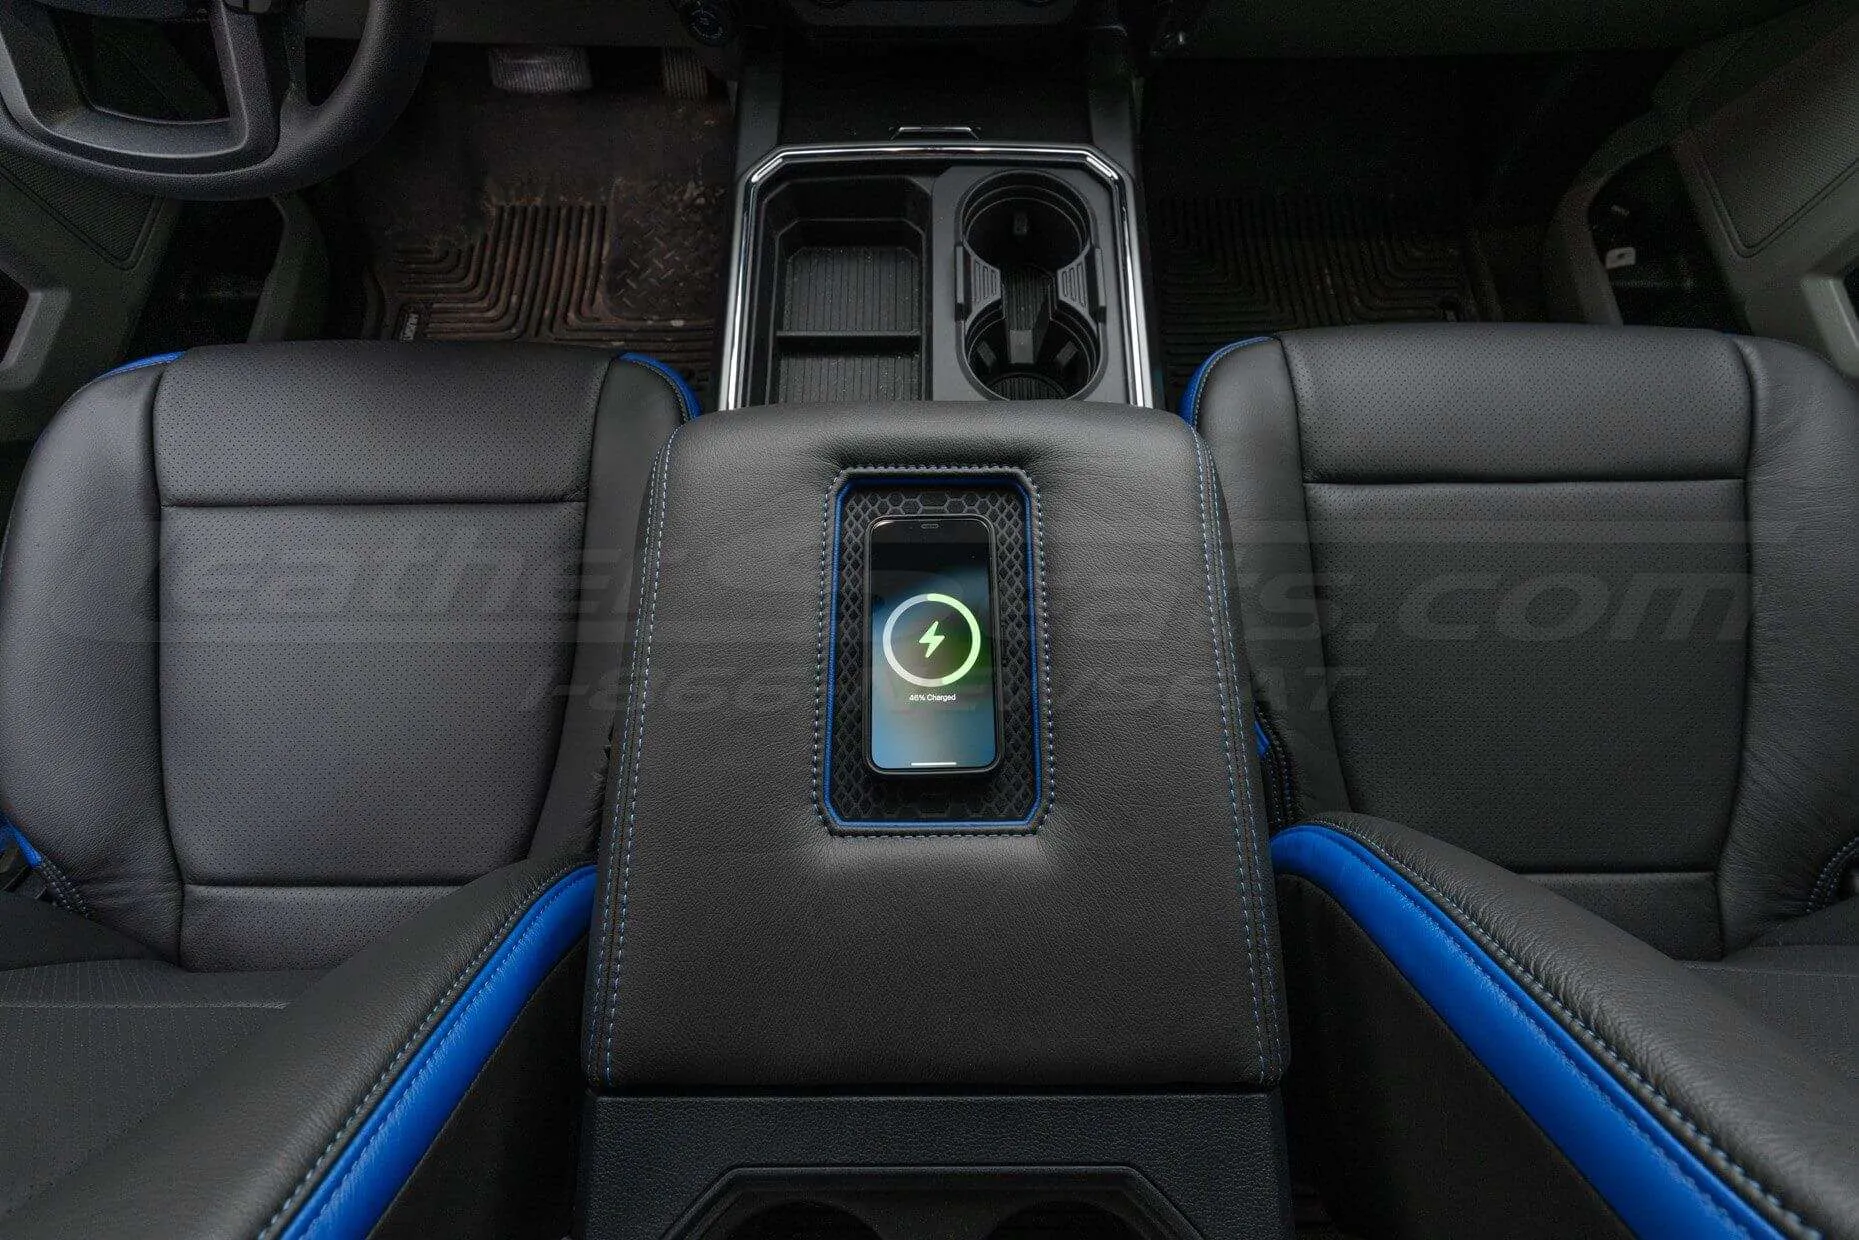 Top-down view of Wireless Phone Charging Console for Ford Trucks with phone being charged